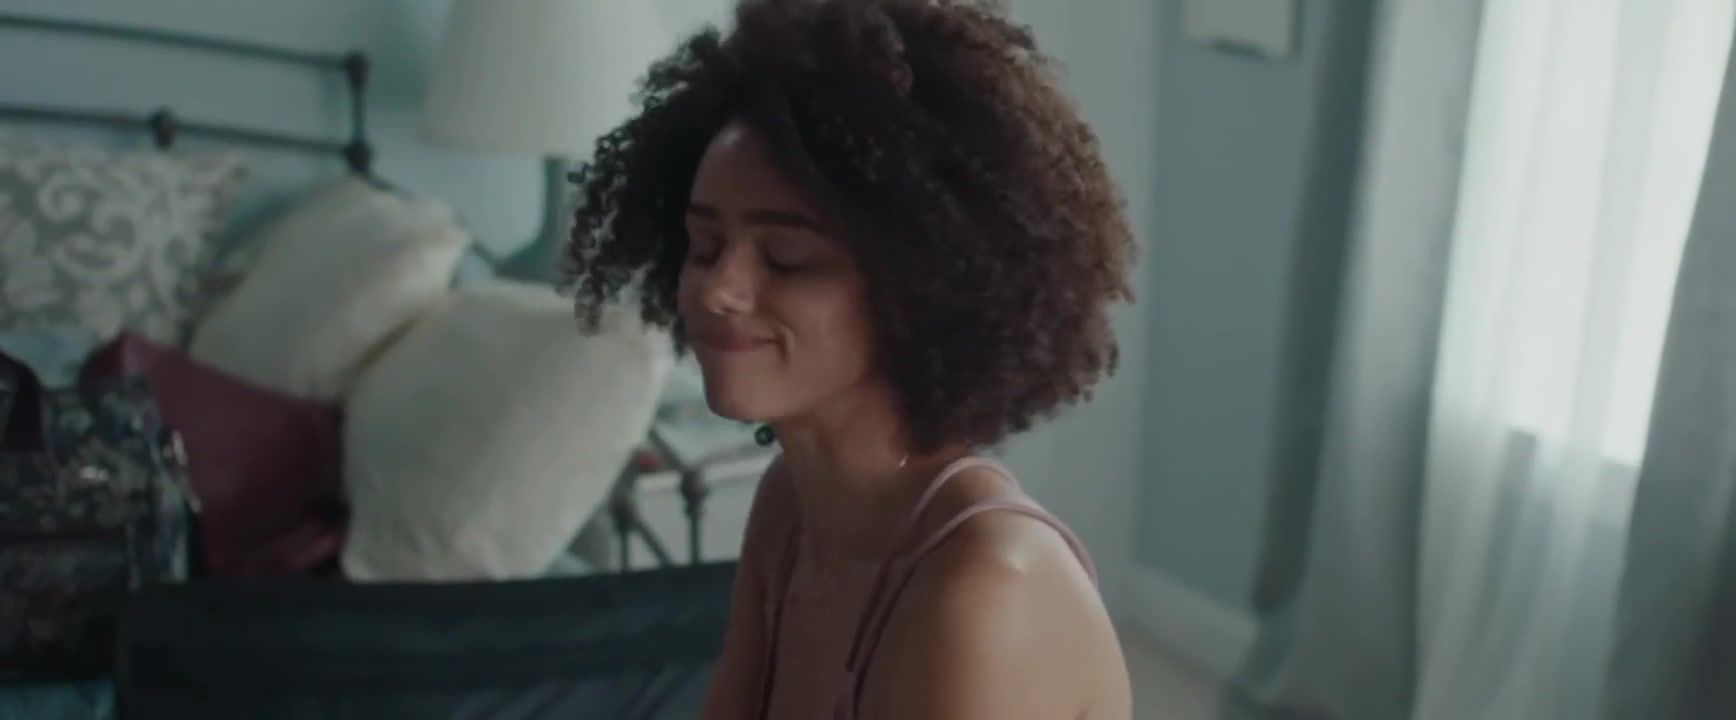 Gay Uncut Black Nathalie Emmanuel joins white co-star Britt Lower nude in Holly Slept Over (2020) Bitch